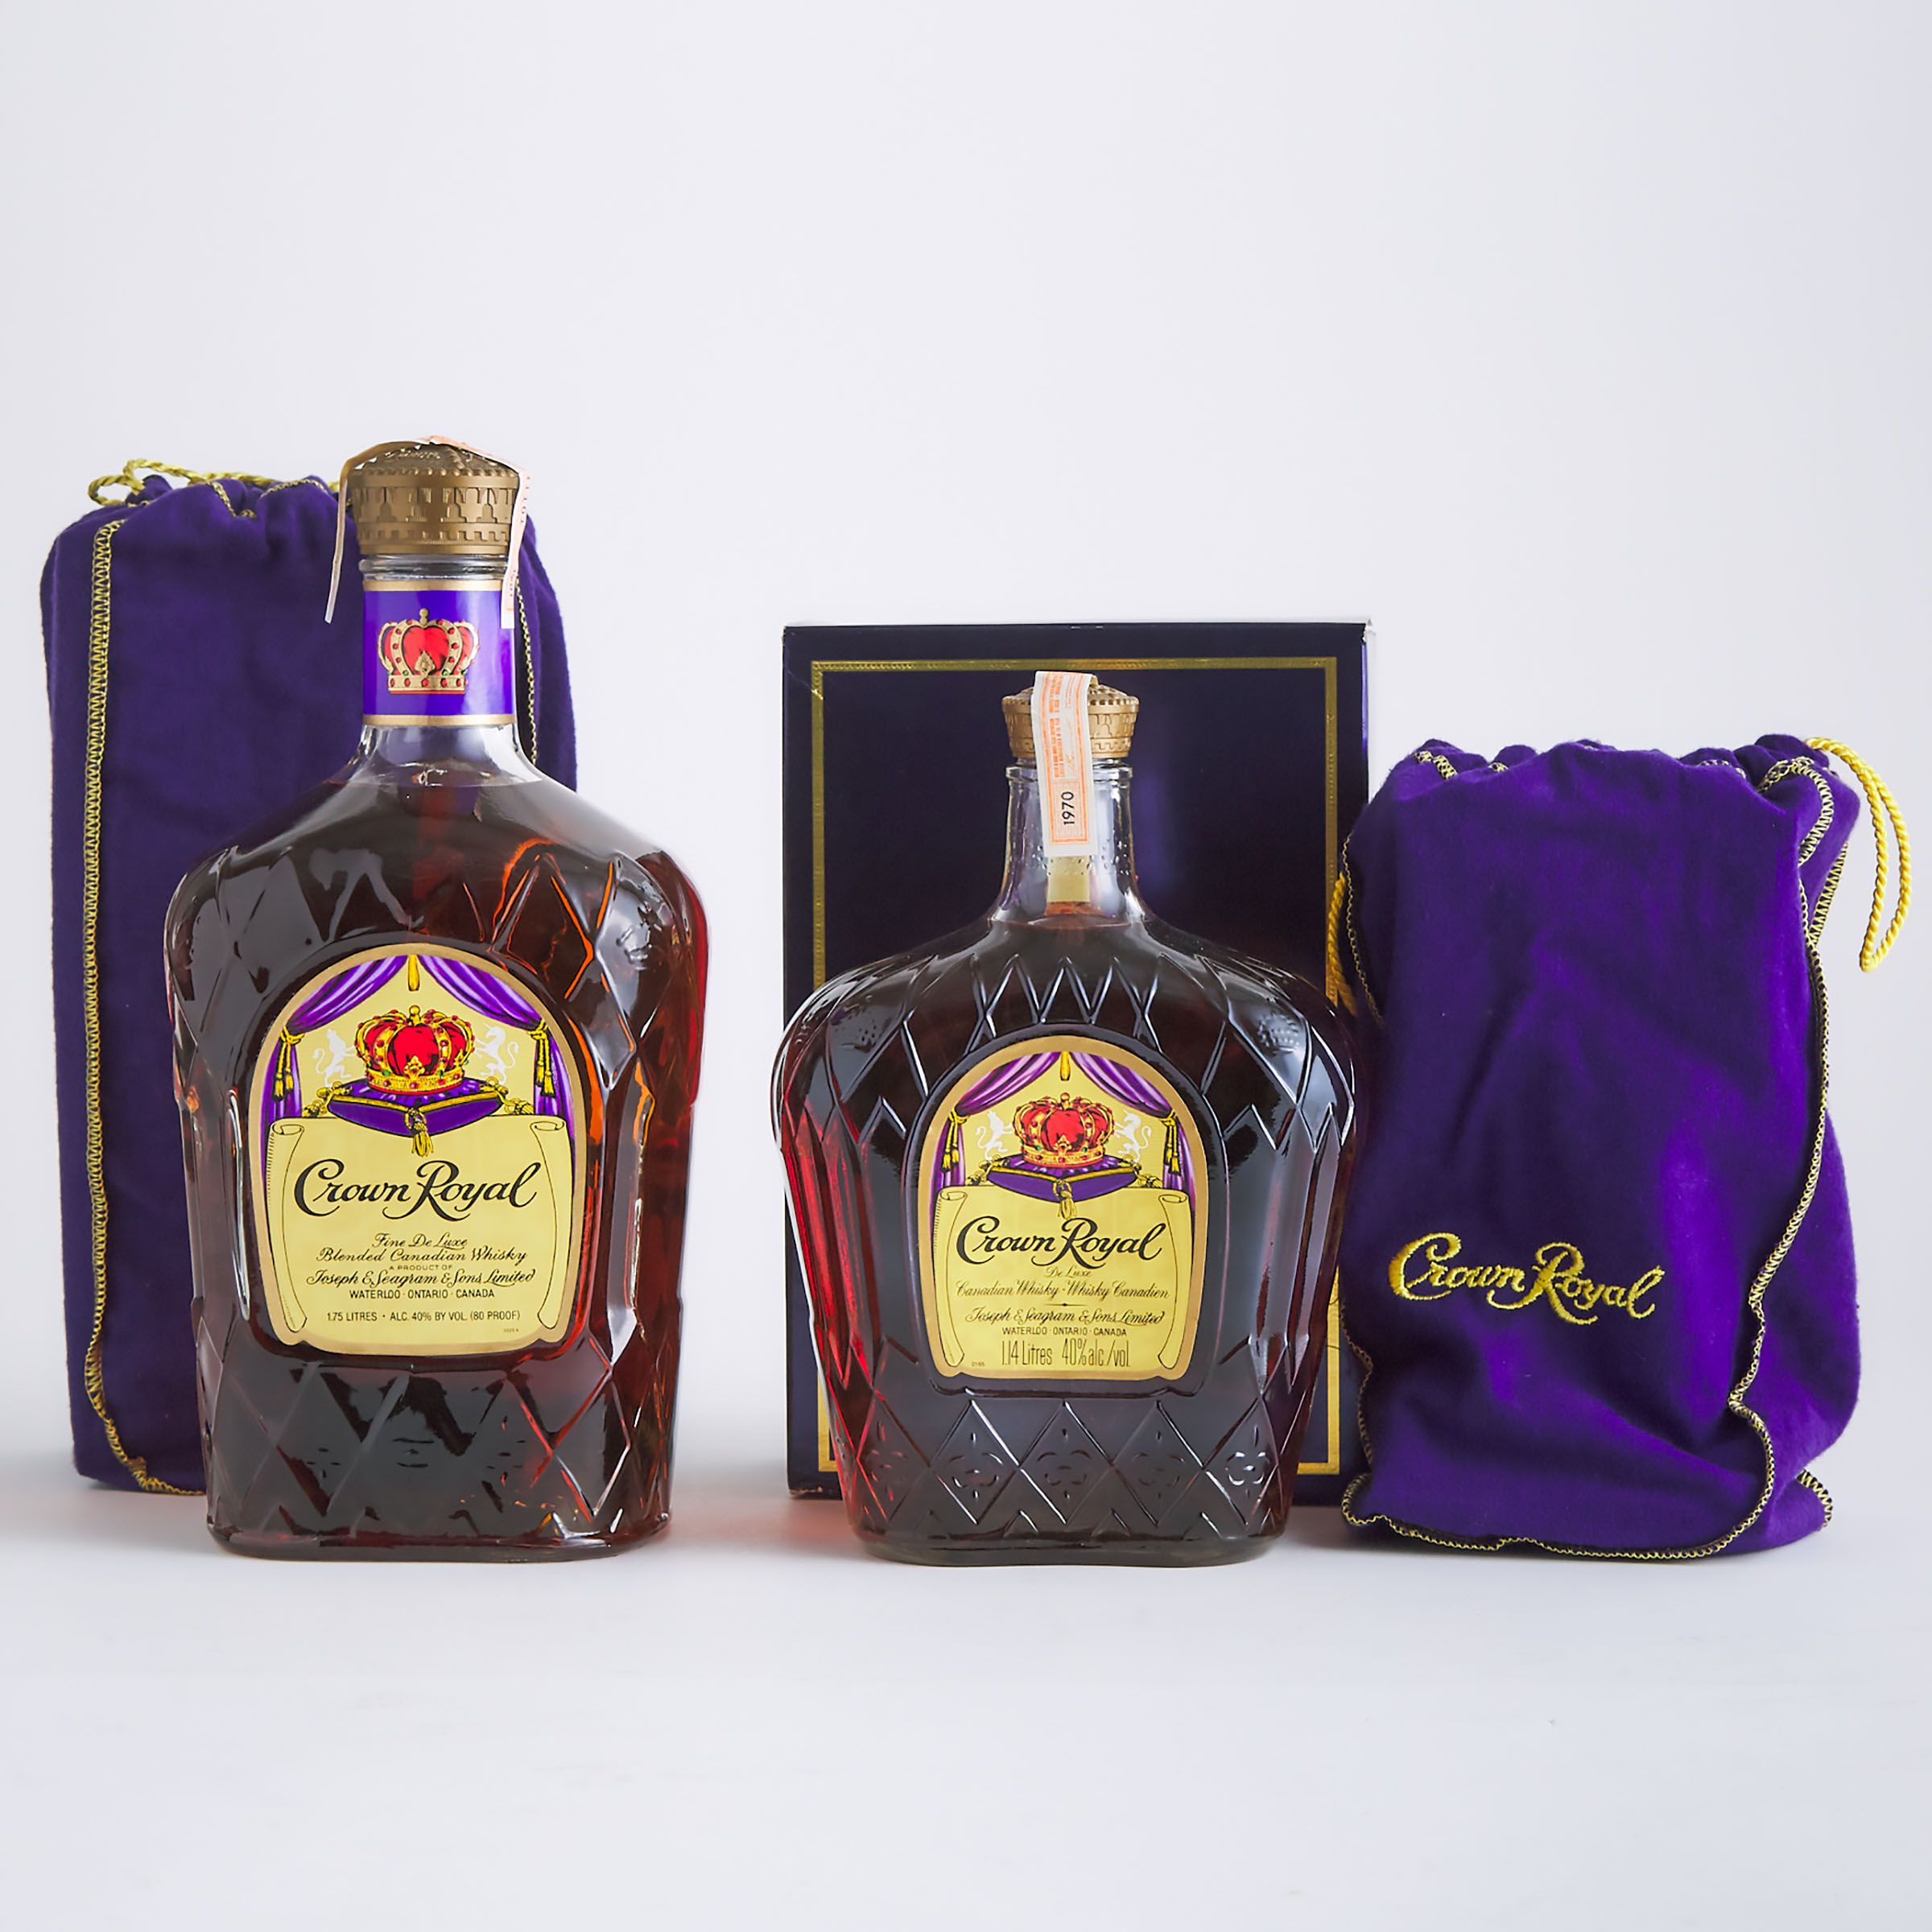 CROWN ROYAL DELUXE CANADIAN WHISKY (ONE 1.14L)
CROWN ROYAL DELUXE CANADIAN WHISKY (ONE 1.75 L)